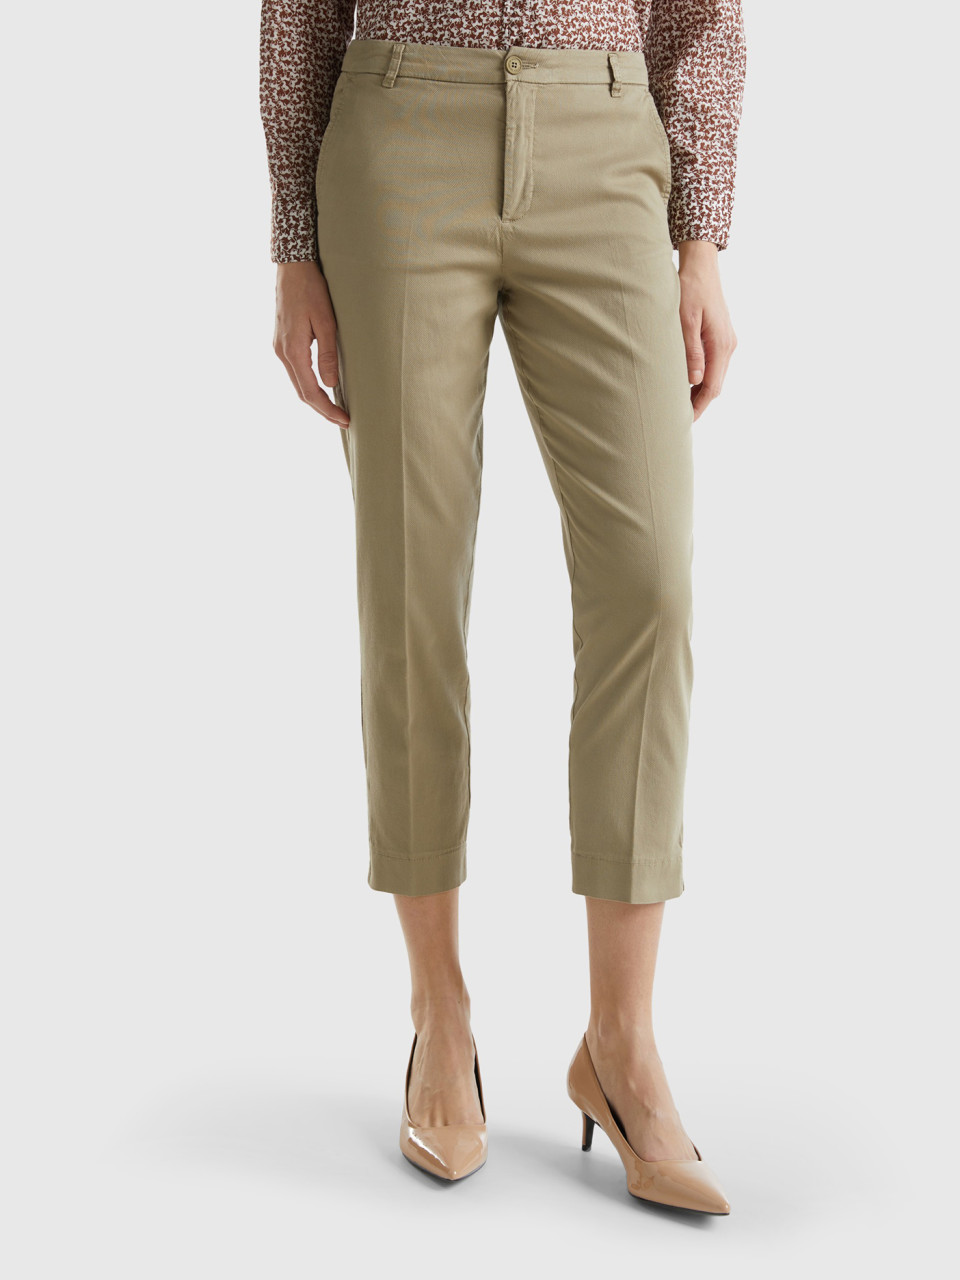 Benetton, Cropped Chinos In Stretch Cotton, Light Green, Women